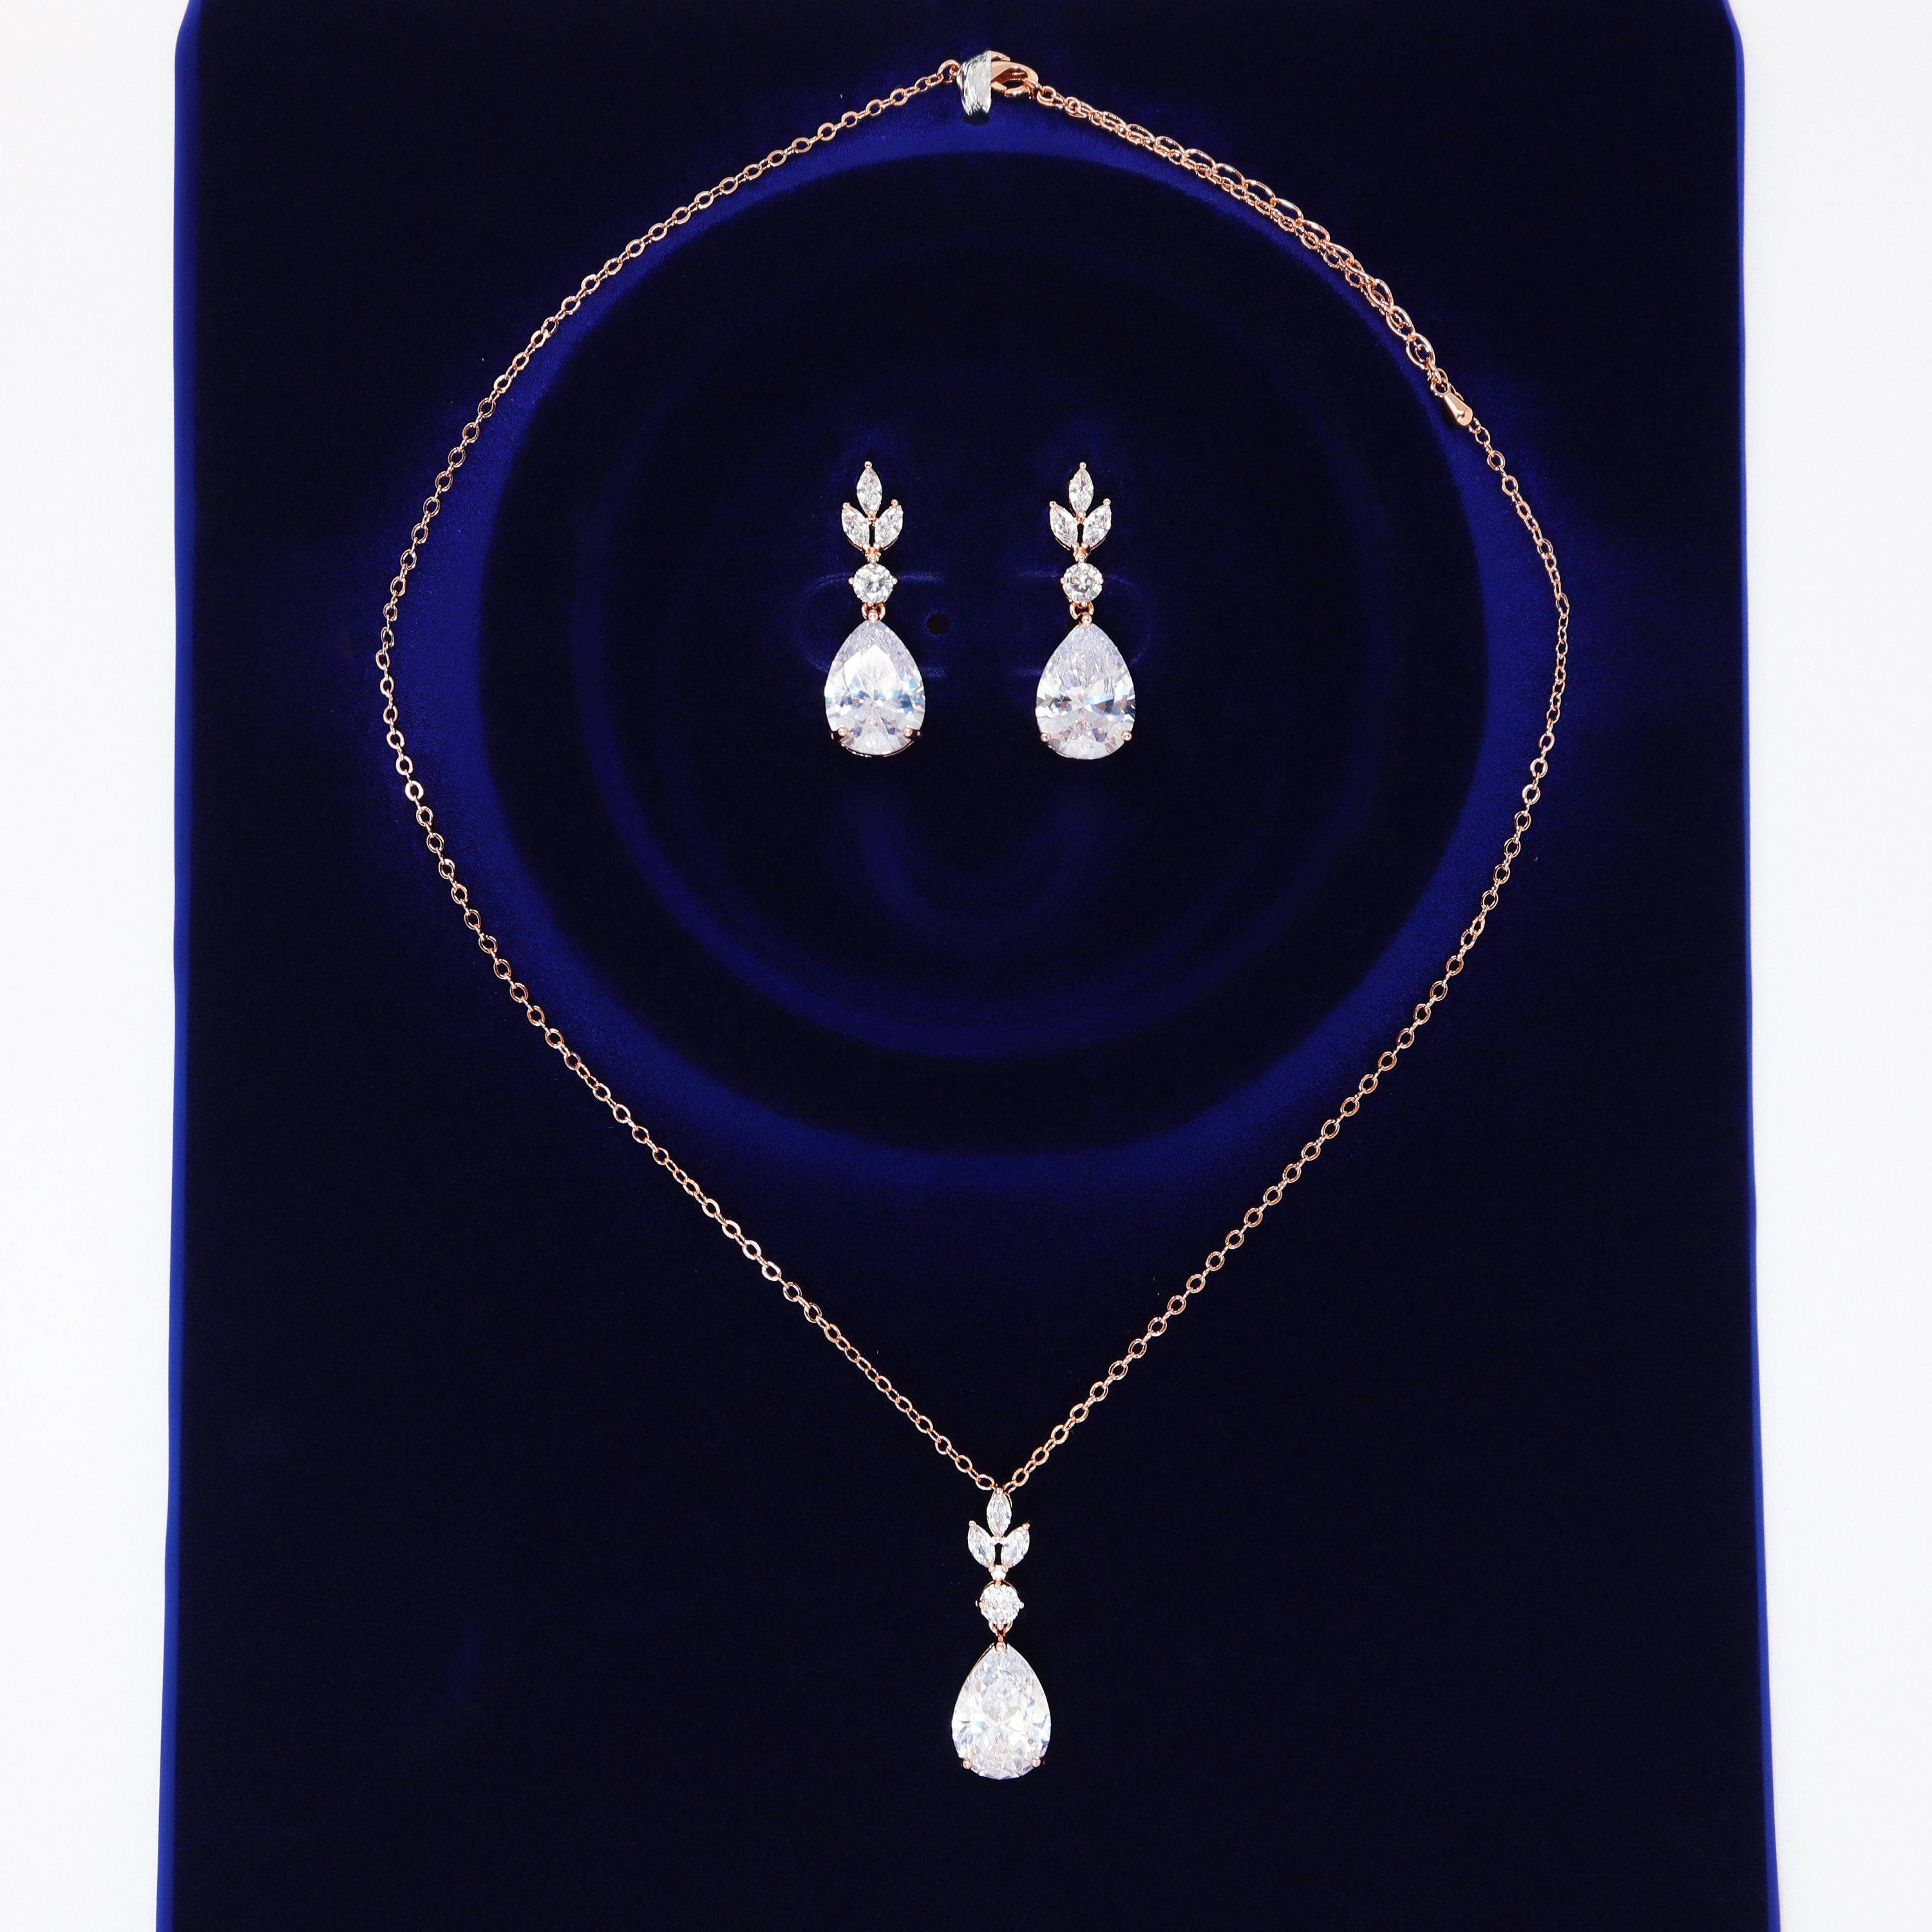 Favored - Amethyst Necklace and Earrings Set